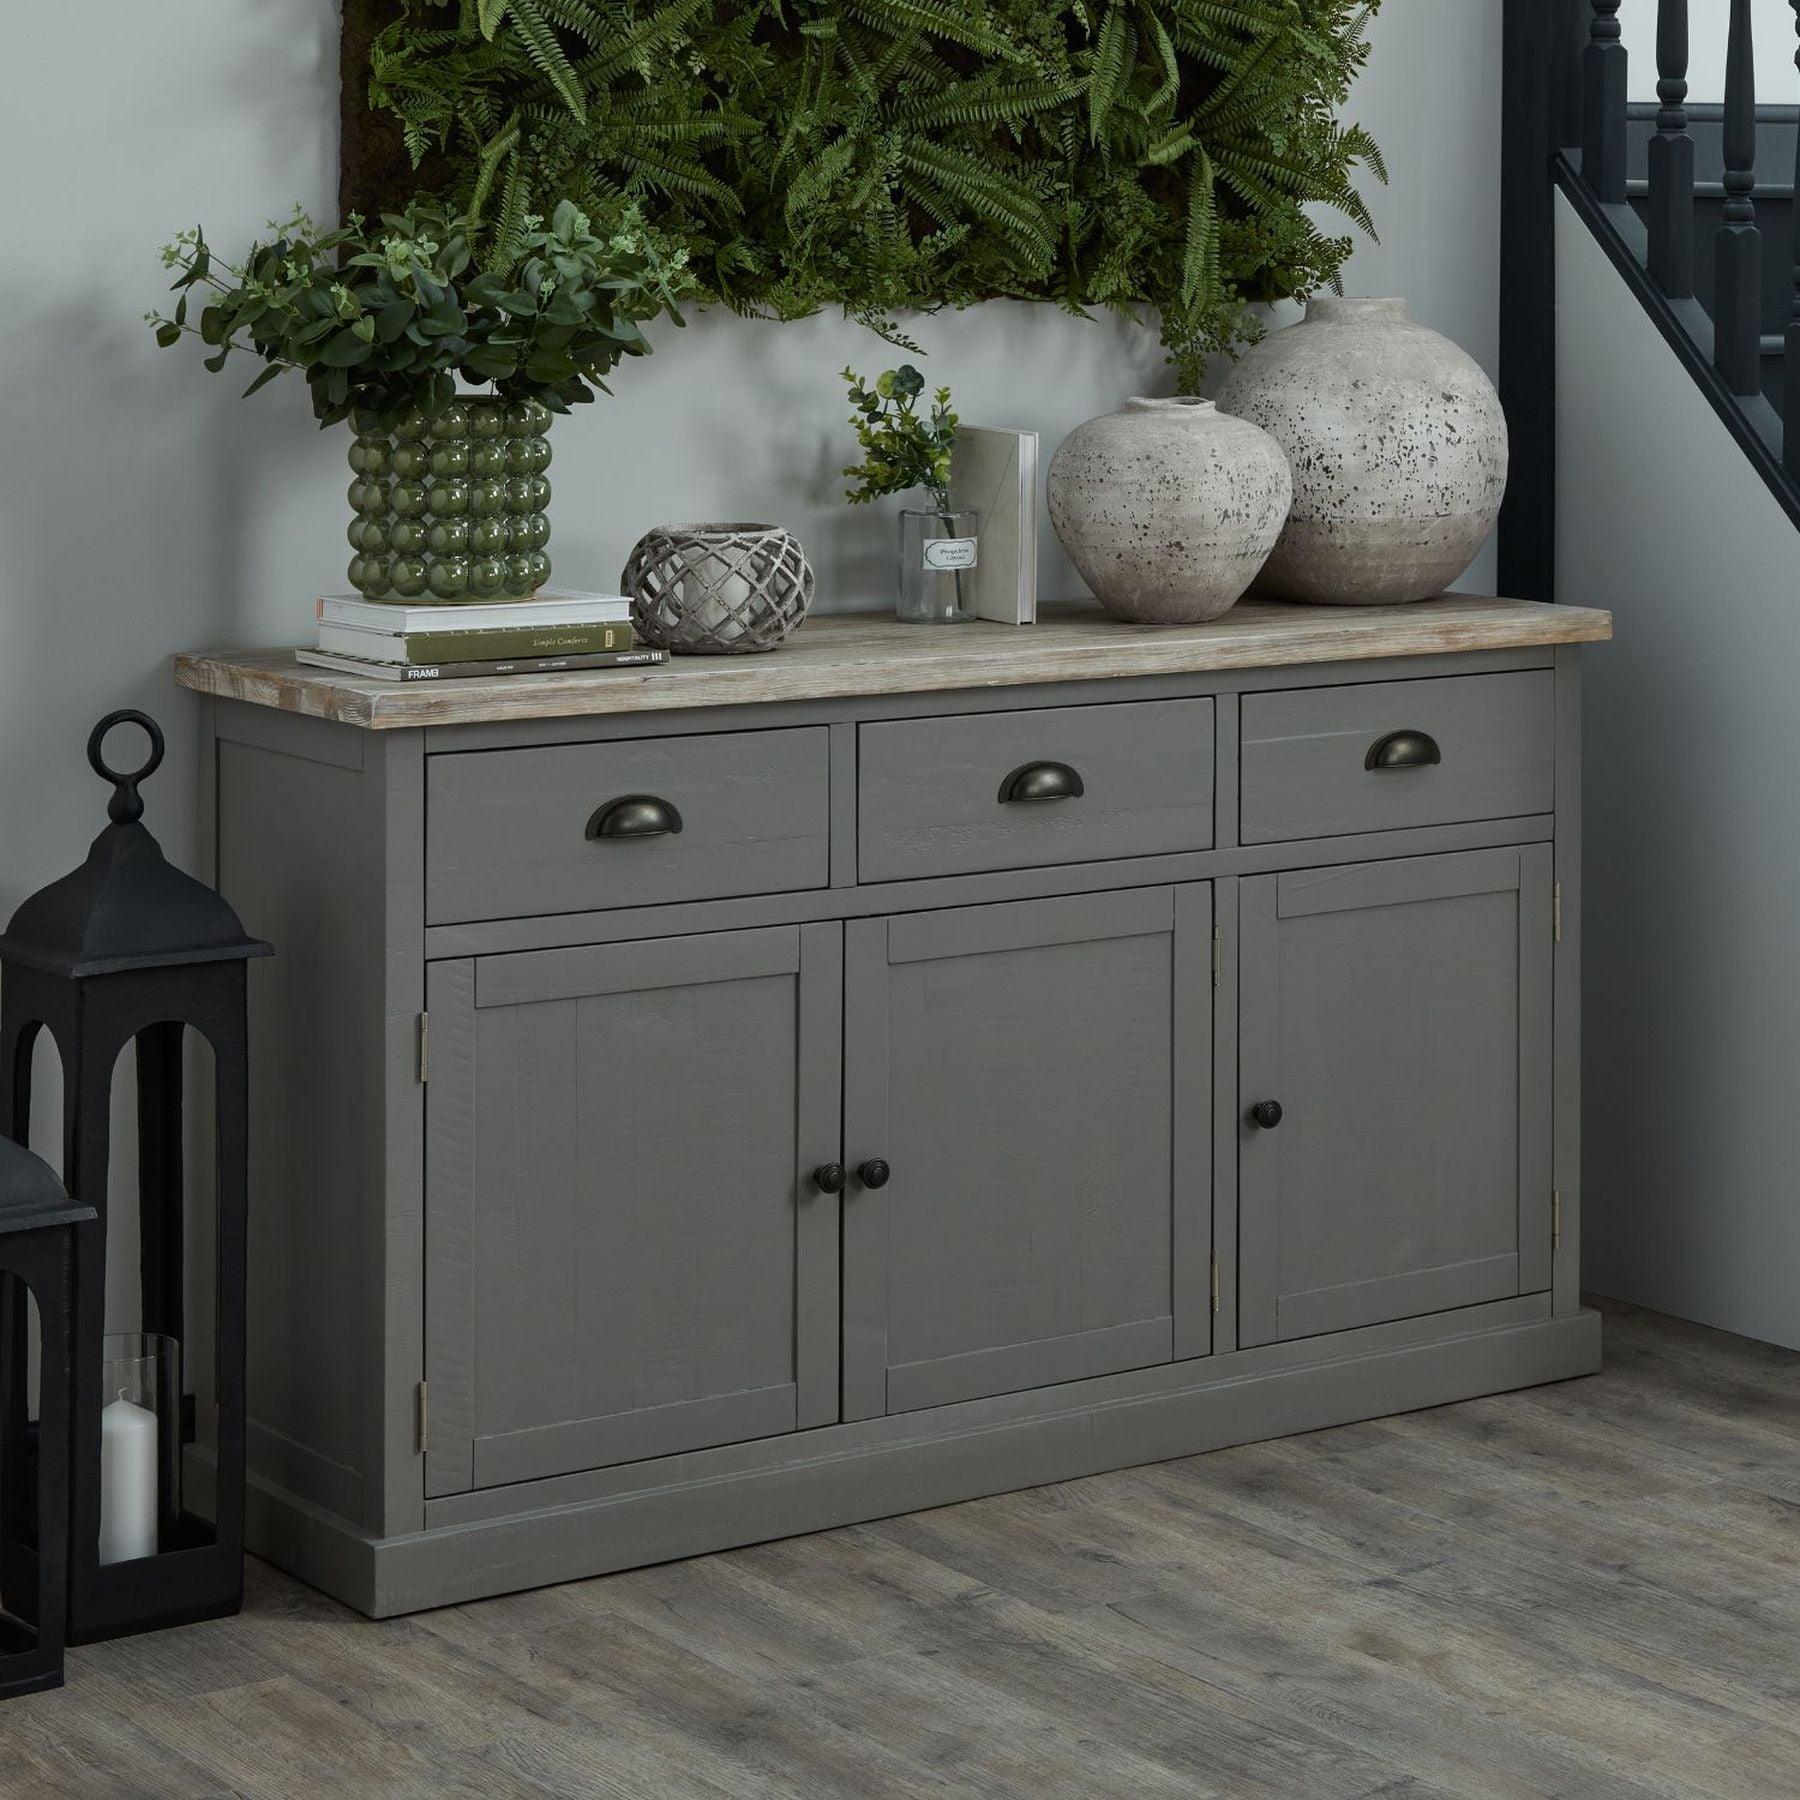 The Oxley Collection Sideboard - Vookoo Lifestyle